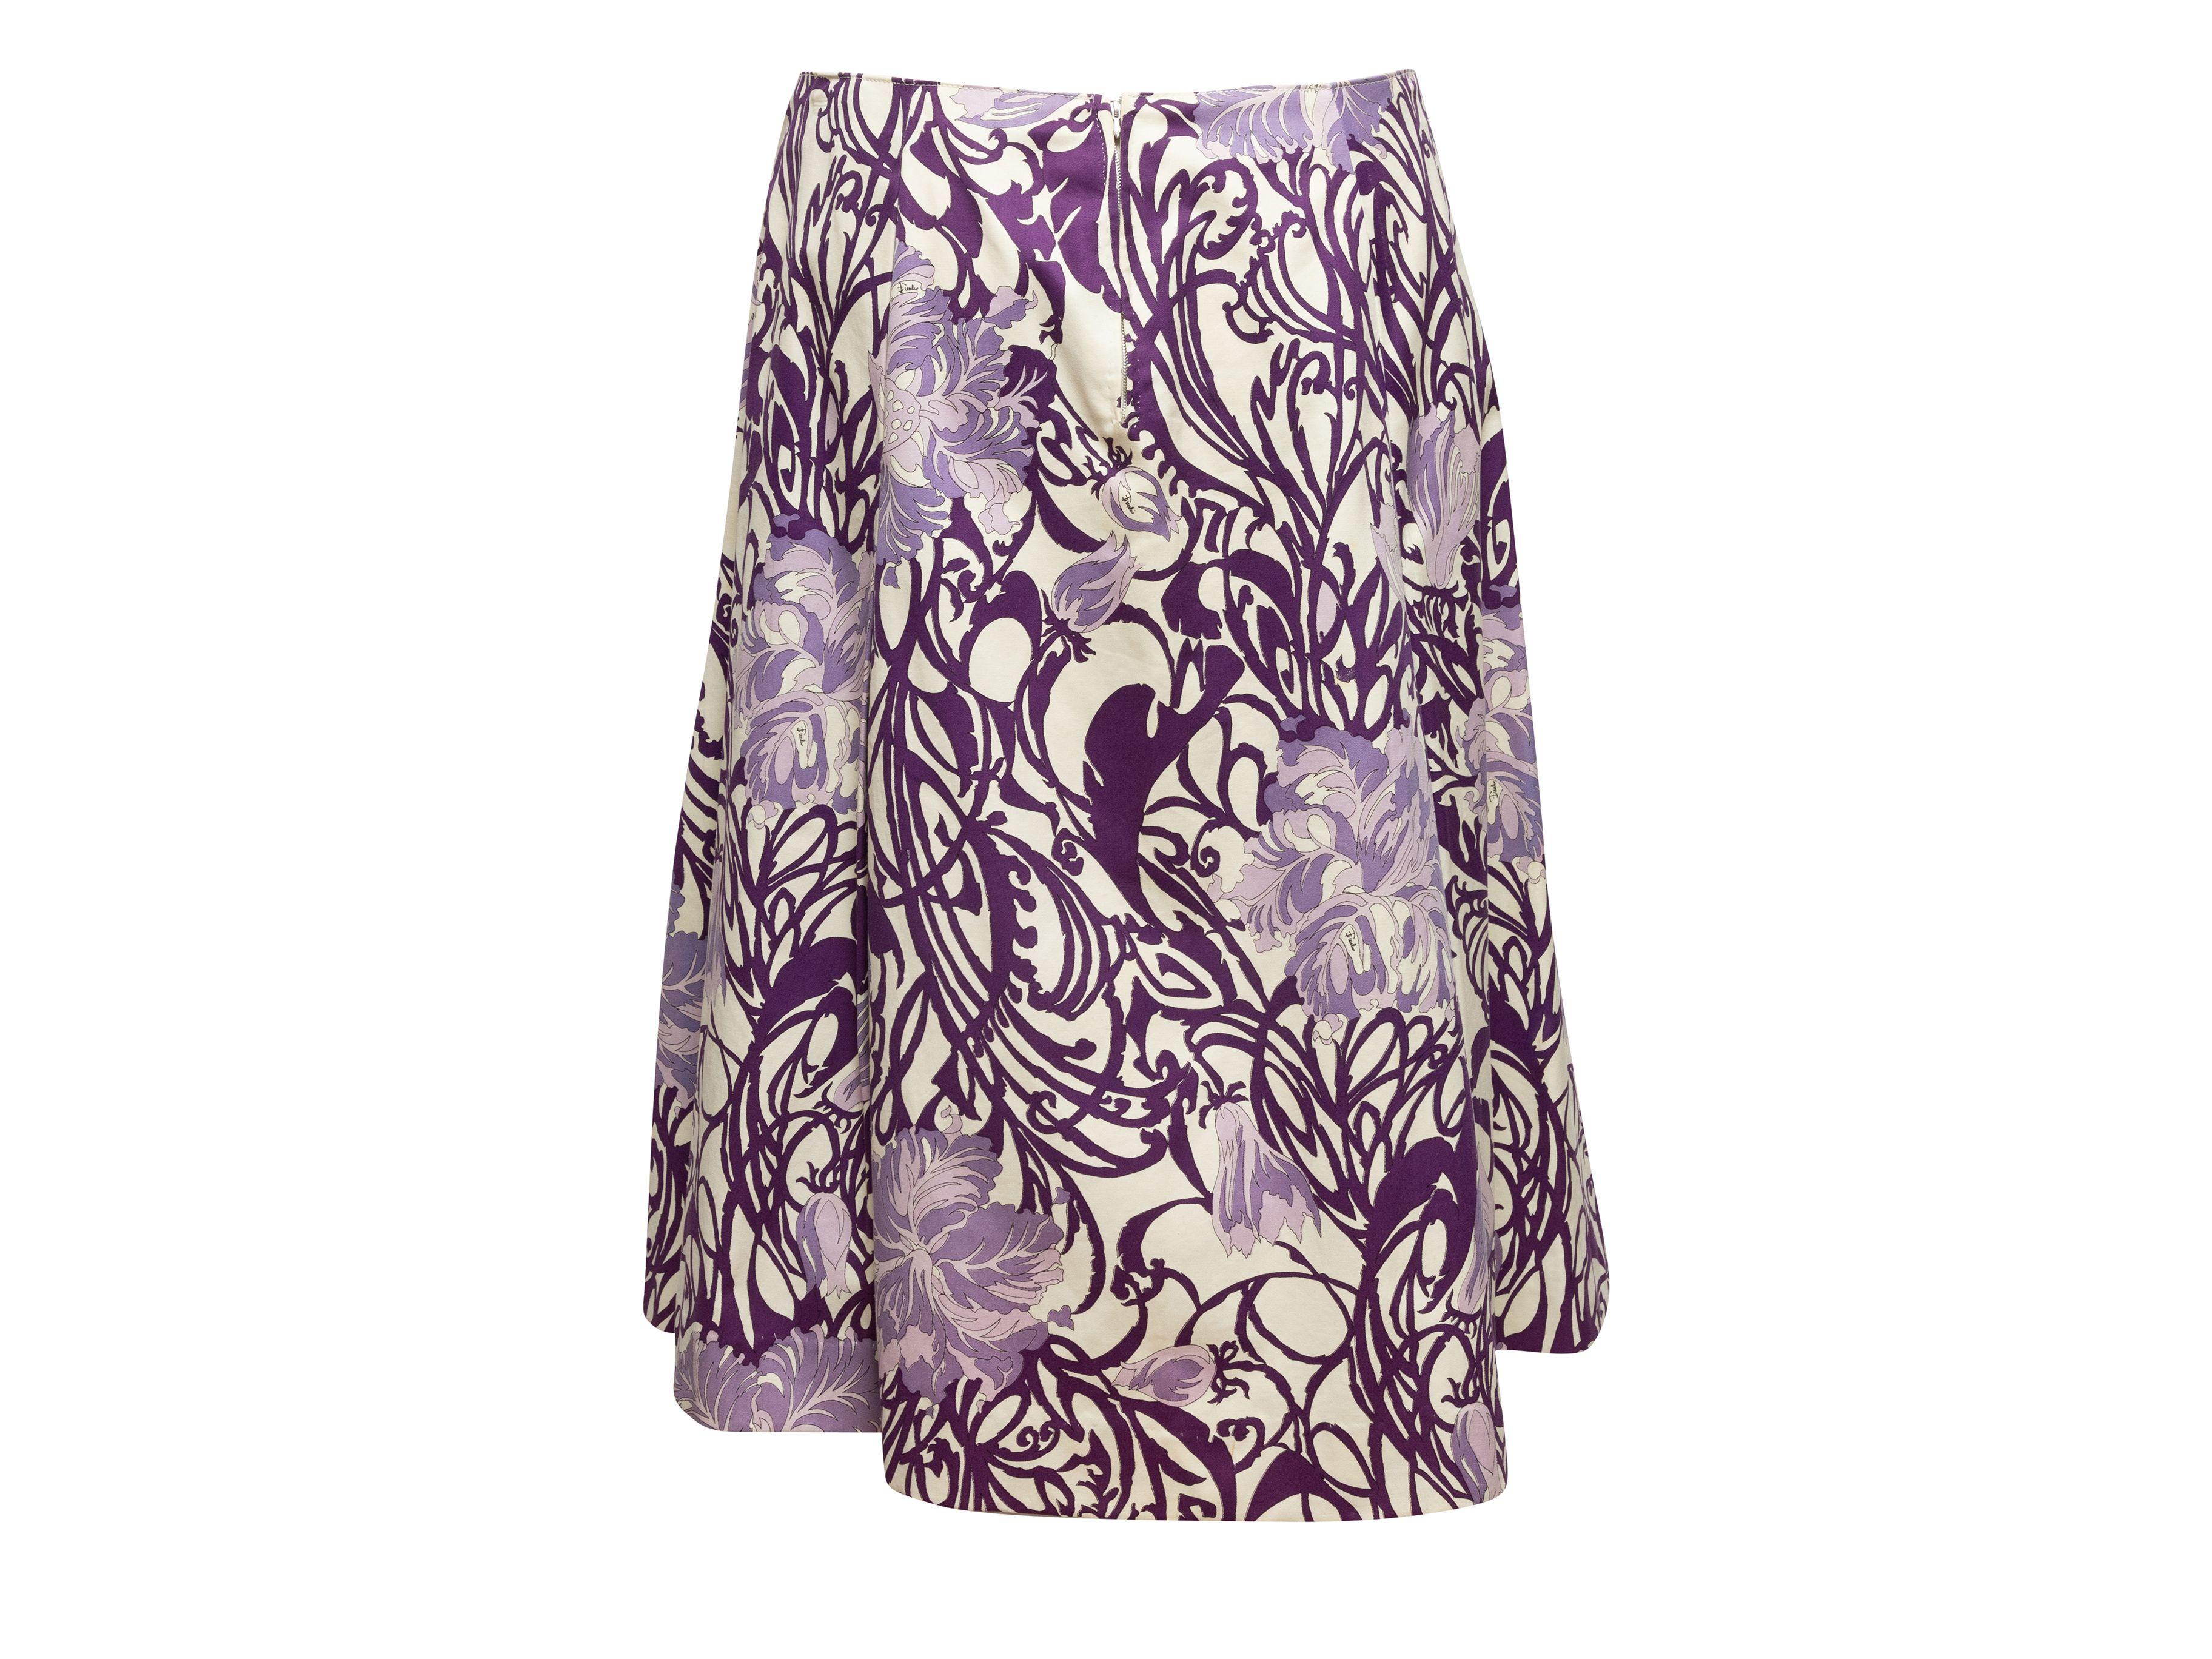 Emilio Pucci Purple & White 60s Floral Print Skirt In Good Condition For Sale In New York, NY